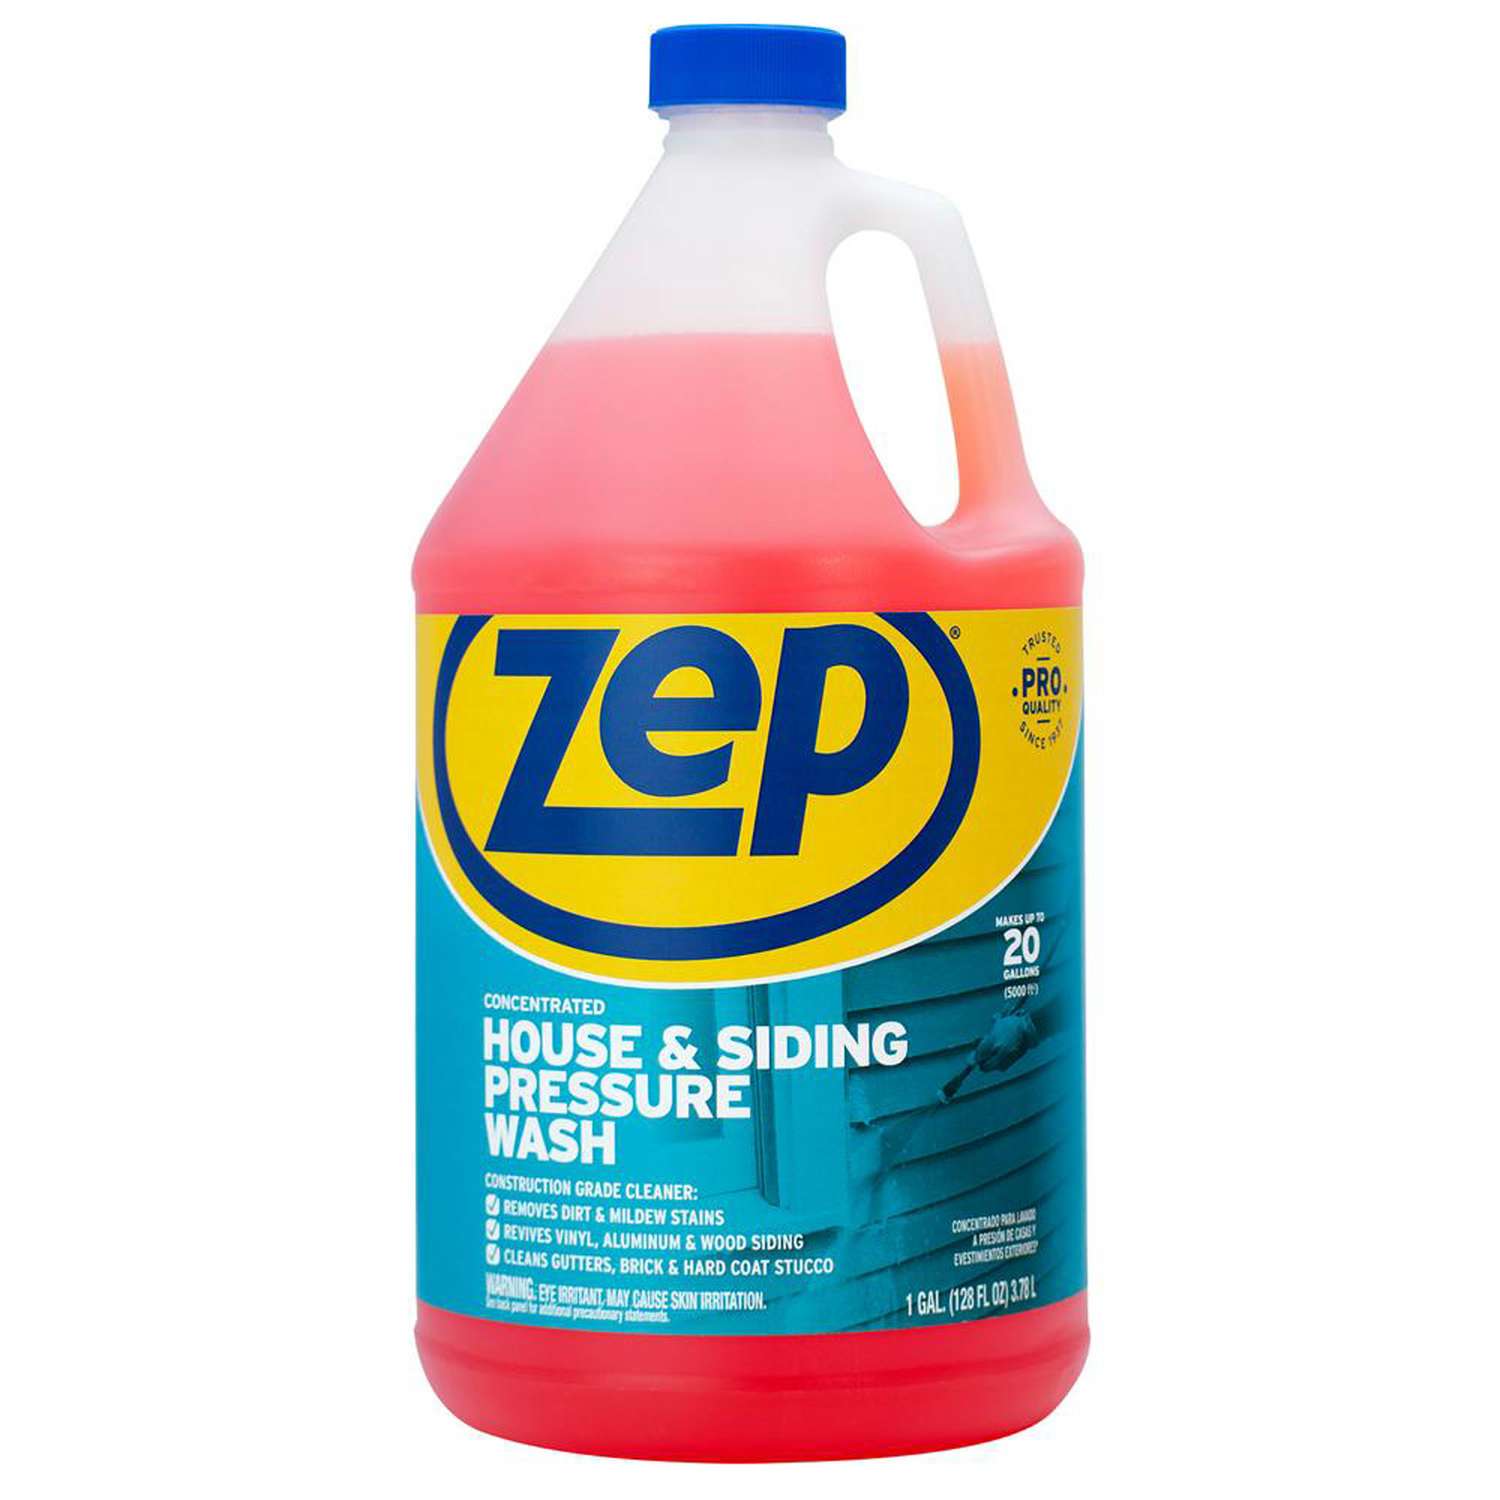 Zep Commercial No Scent House and Siding Pressure Wash 1 gal. Liquid Ace Hardware